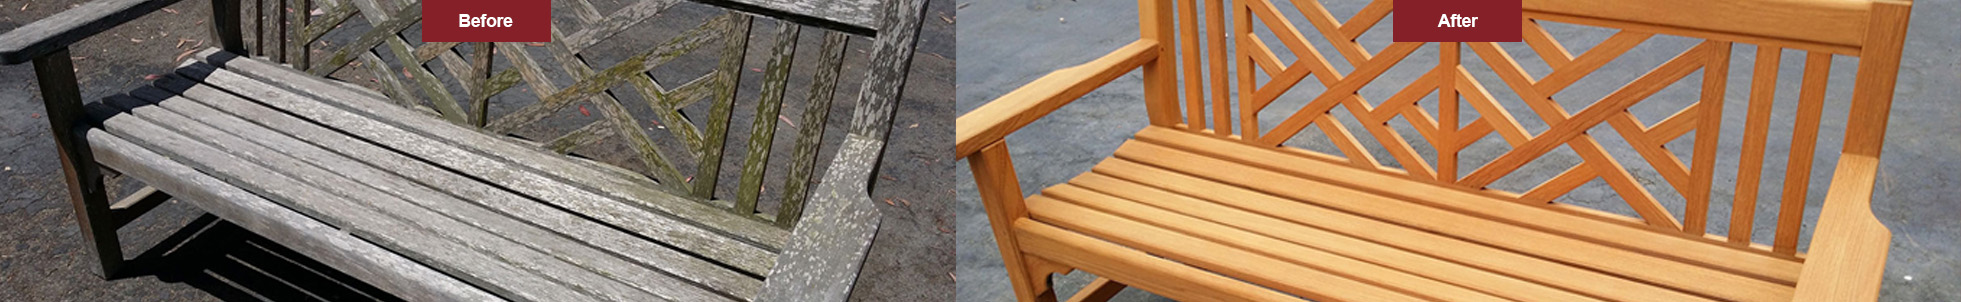 Before and after teak bench refinishing